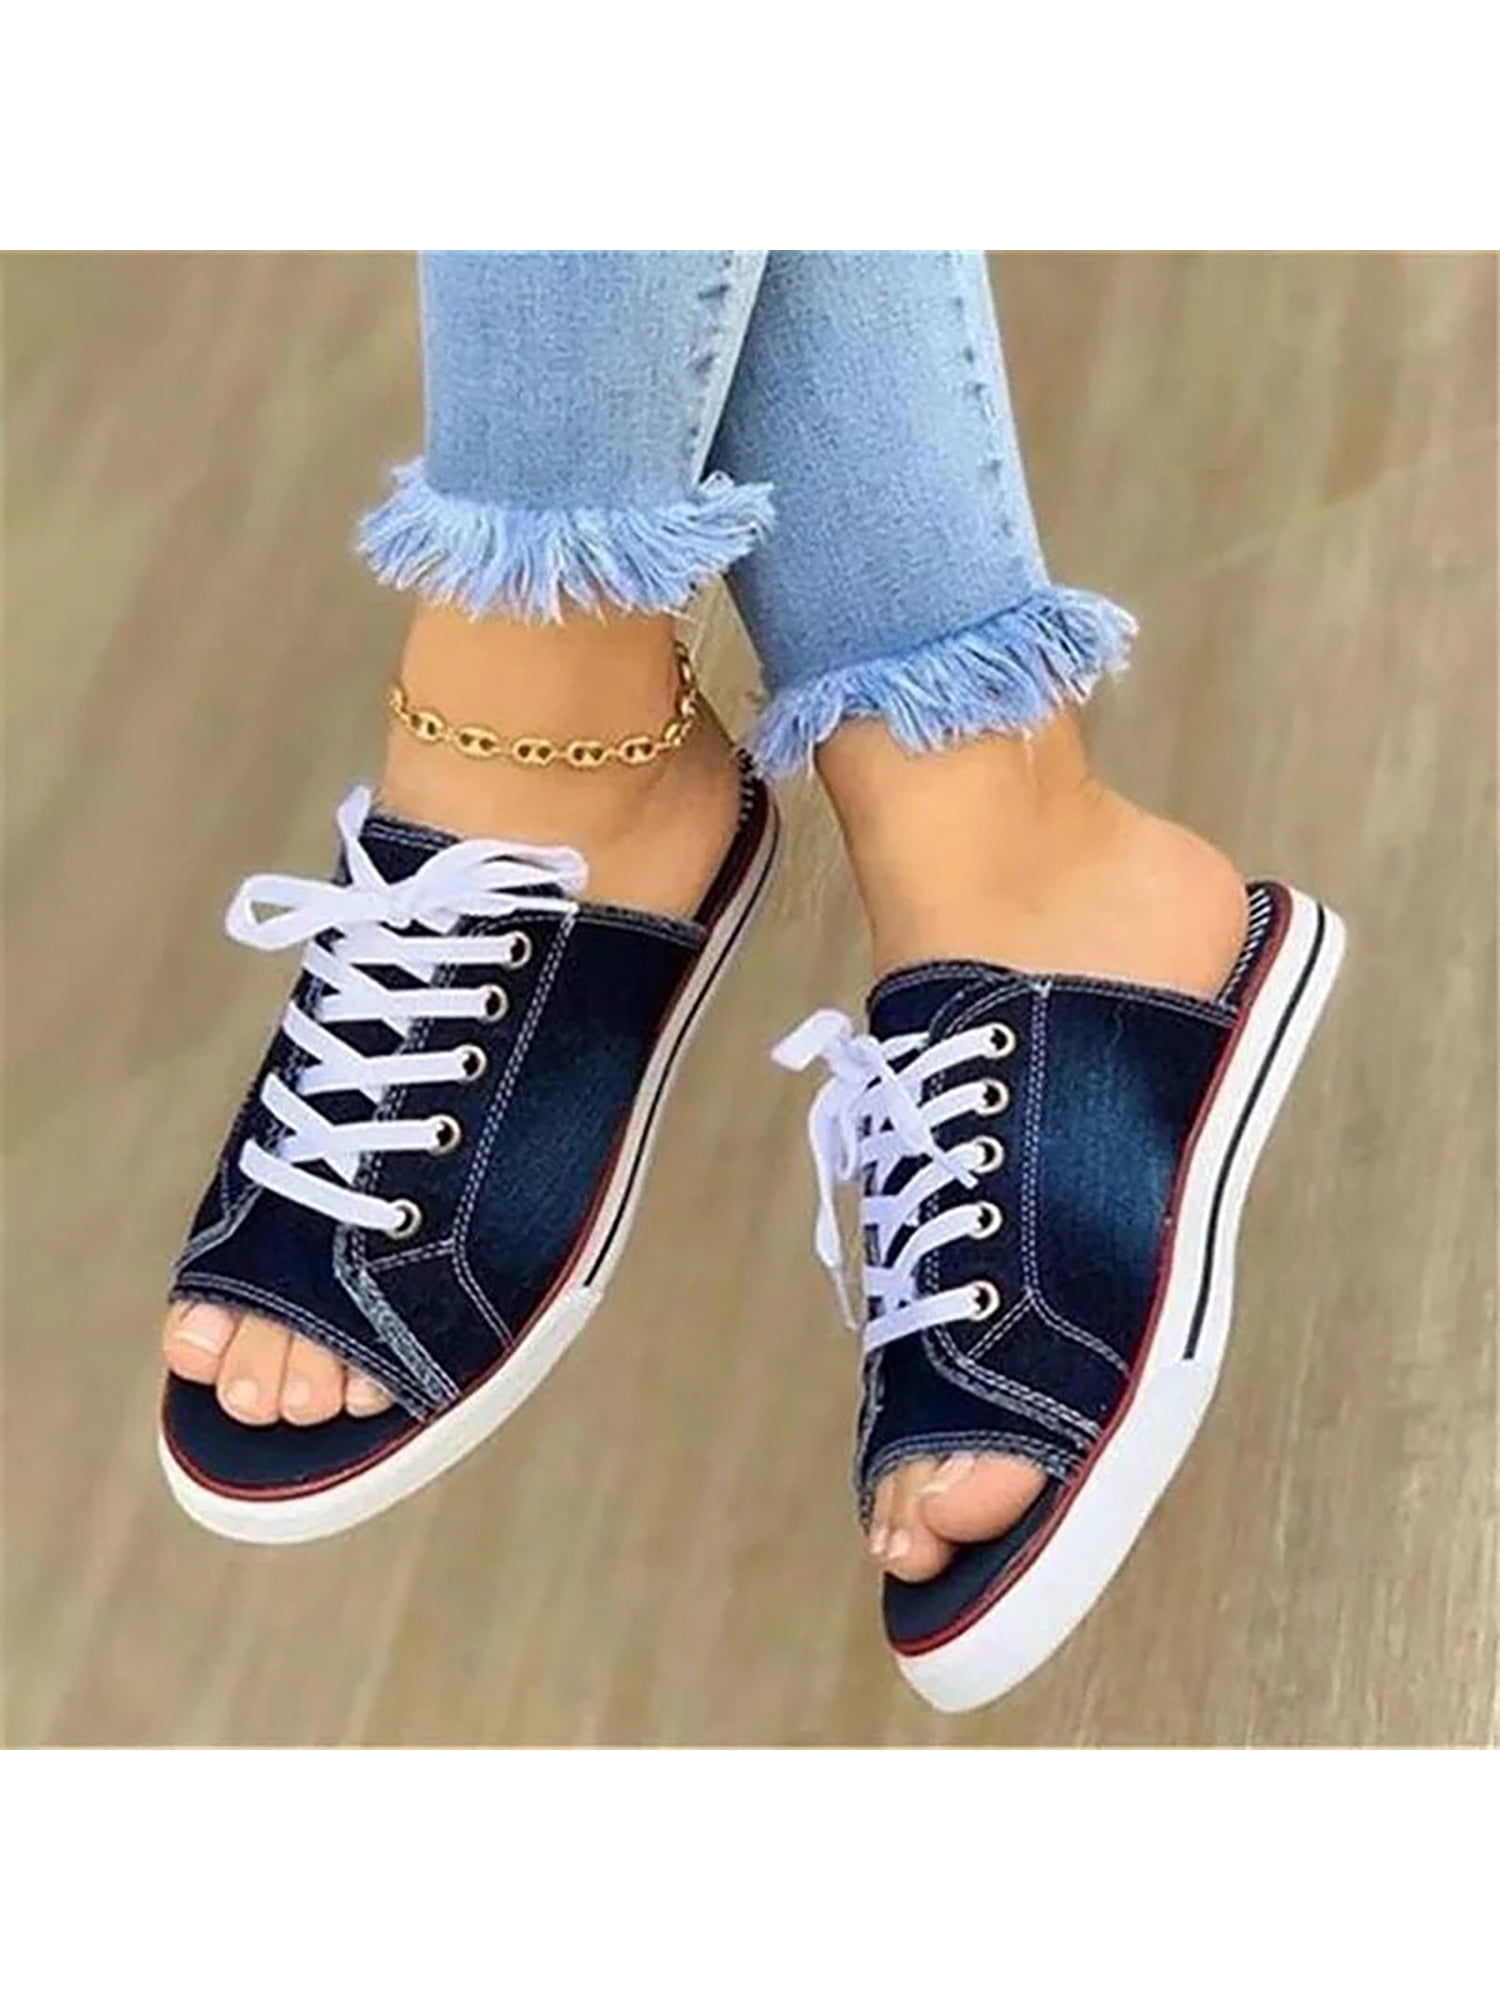 Details about   Women's Casual Flat Bottom Sneakers Ladies Lace Up Trainers Glitter Pumps Shoes 